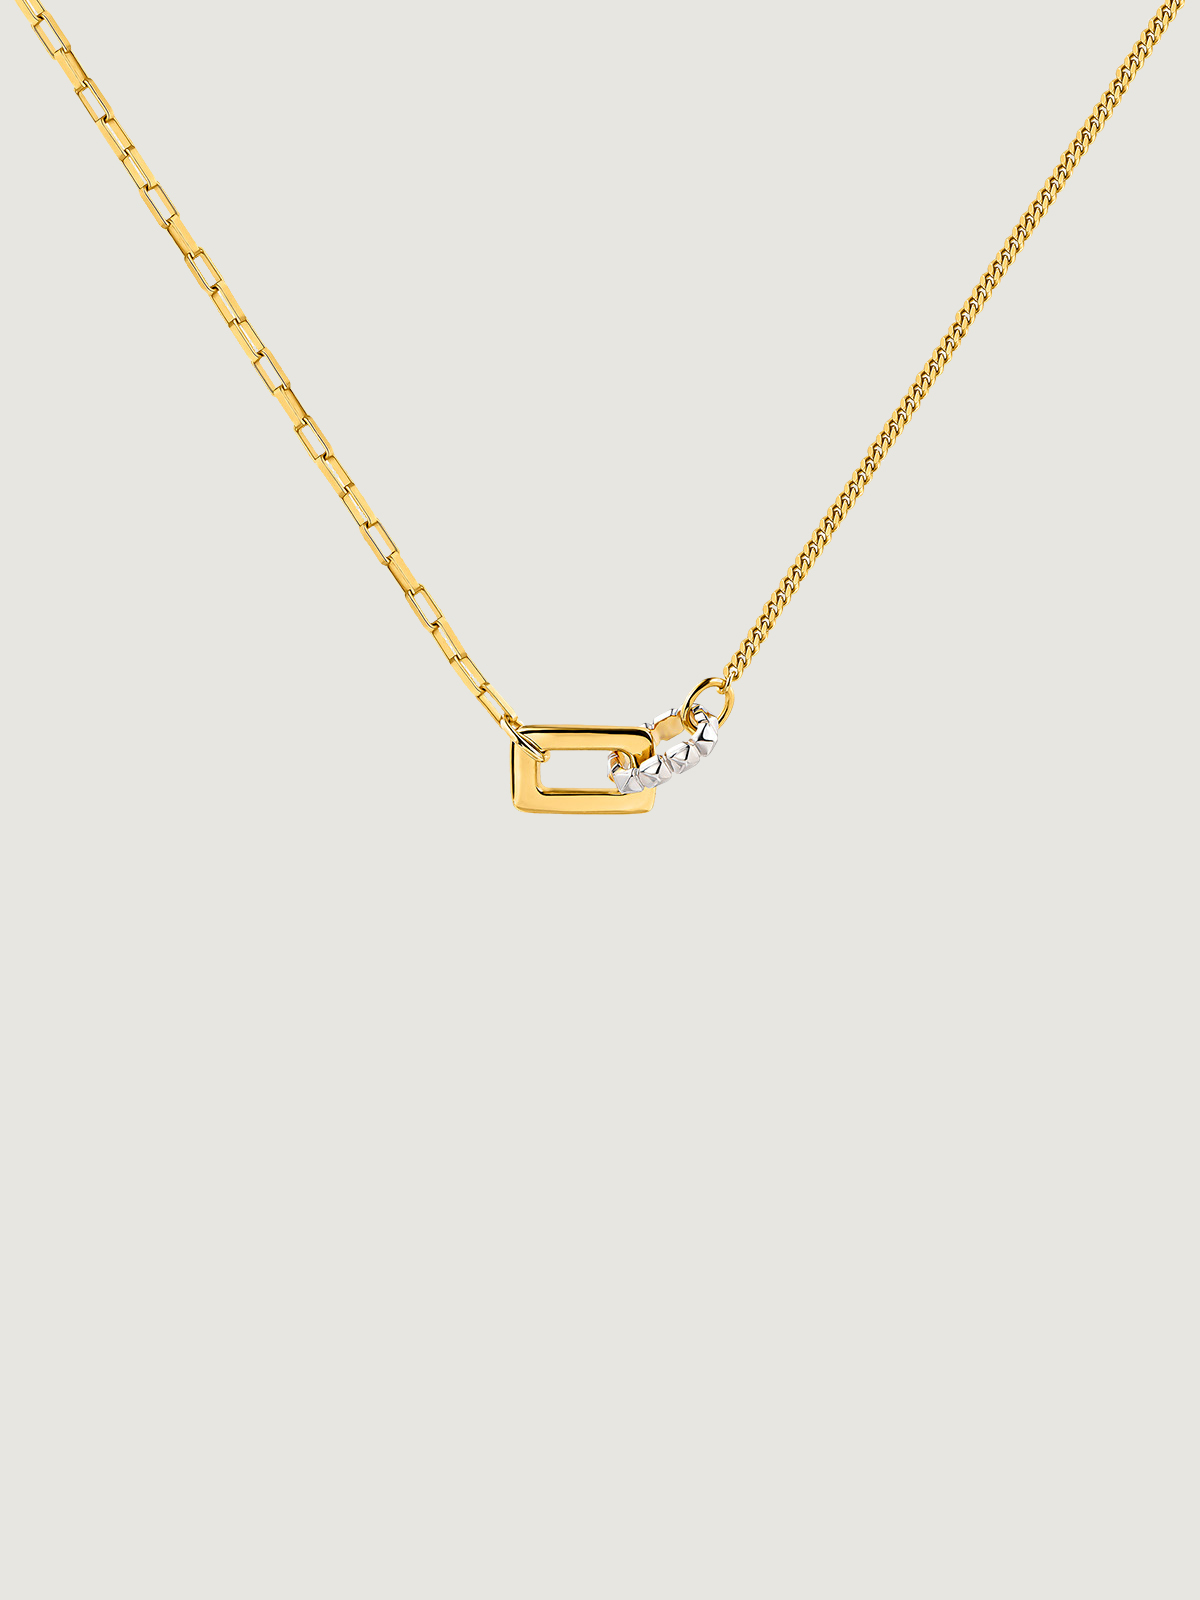 Bicolor pendant of 925 silver and 925 silver bathed in 18K yellow gold with geometric shapes.